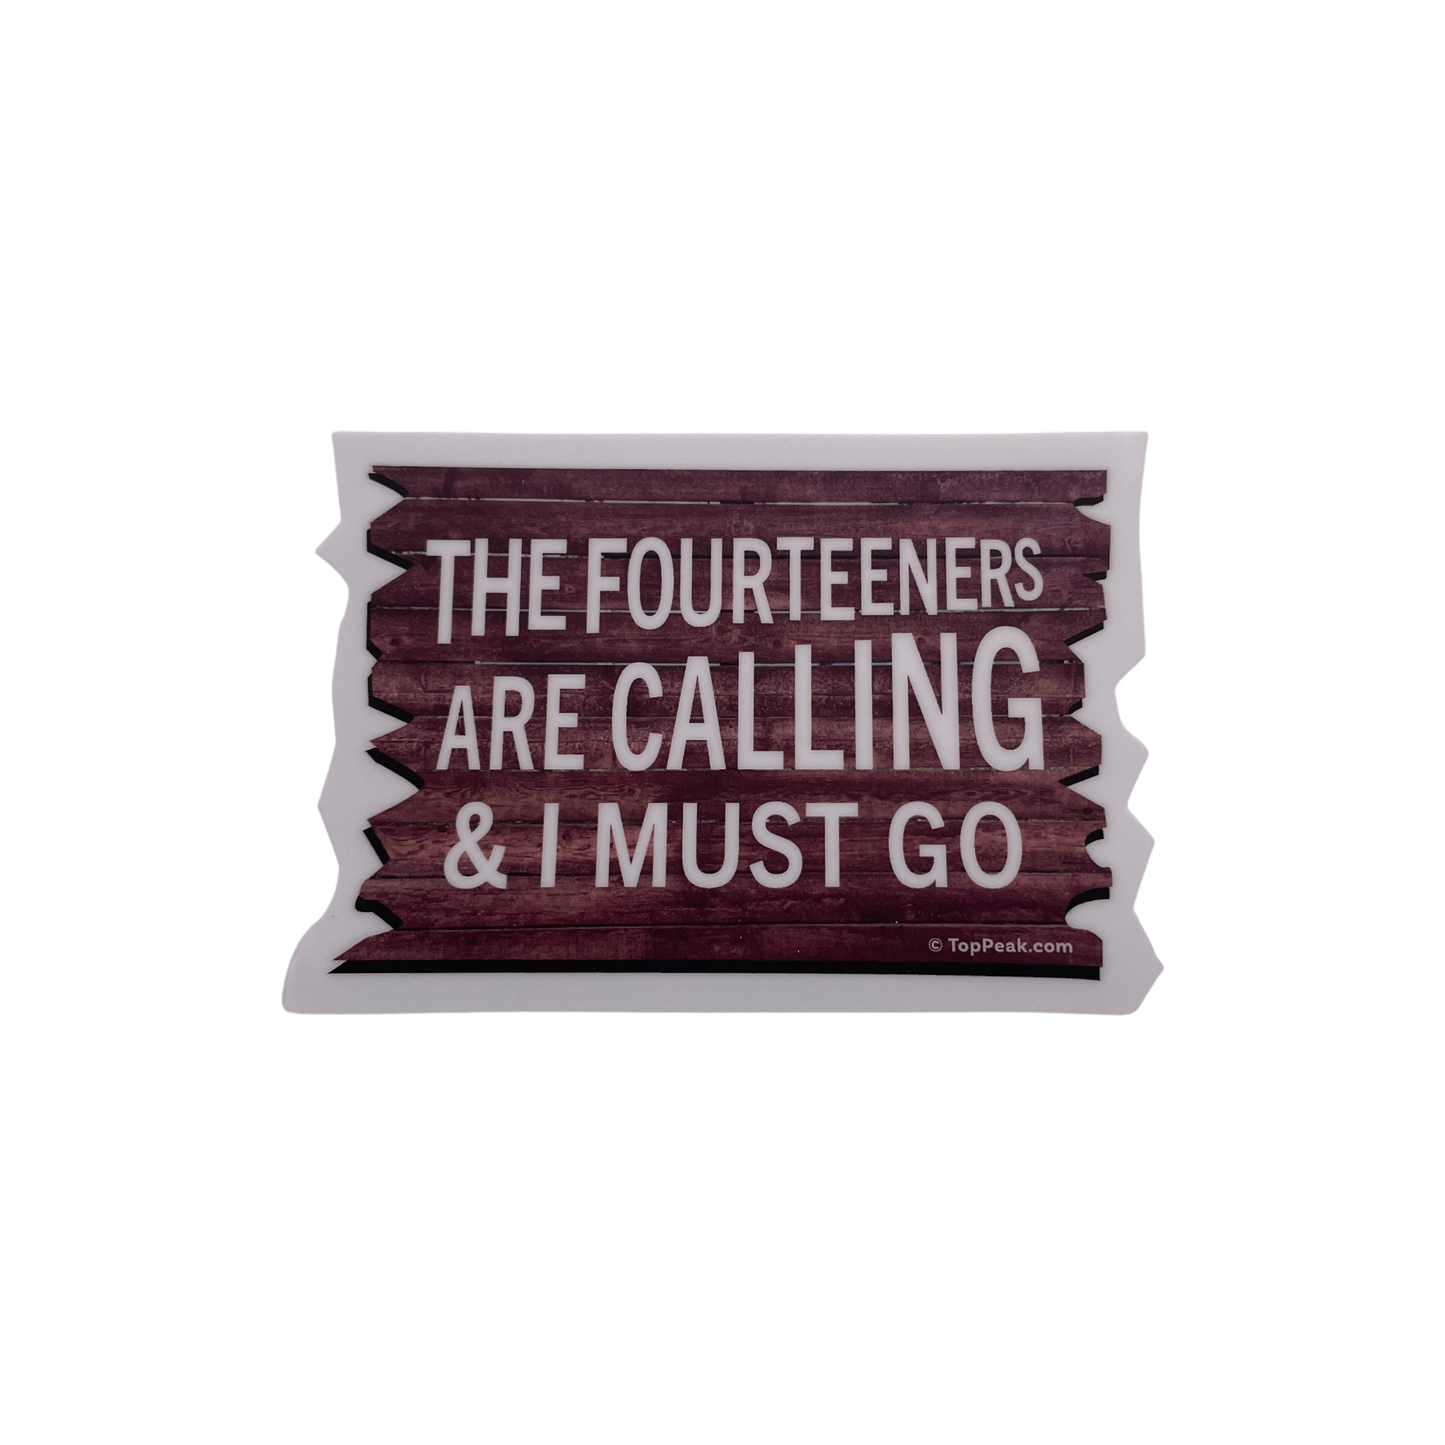 The Fourteeners Are Calling & I Must Go Sticker